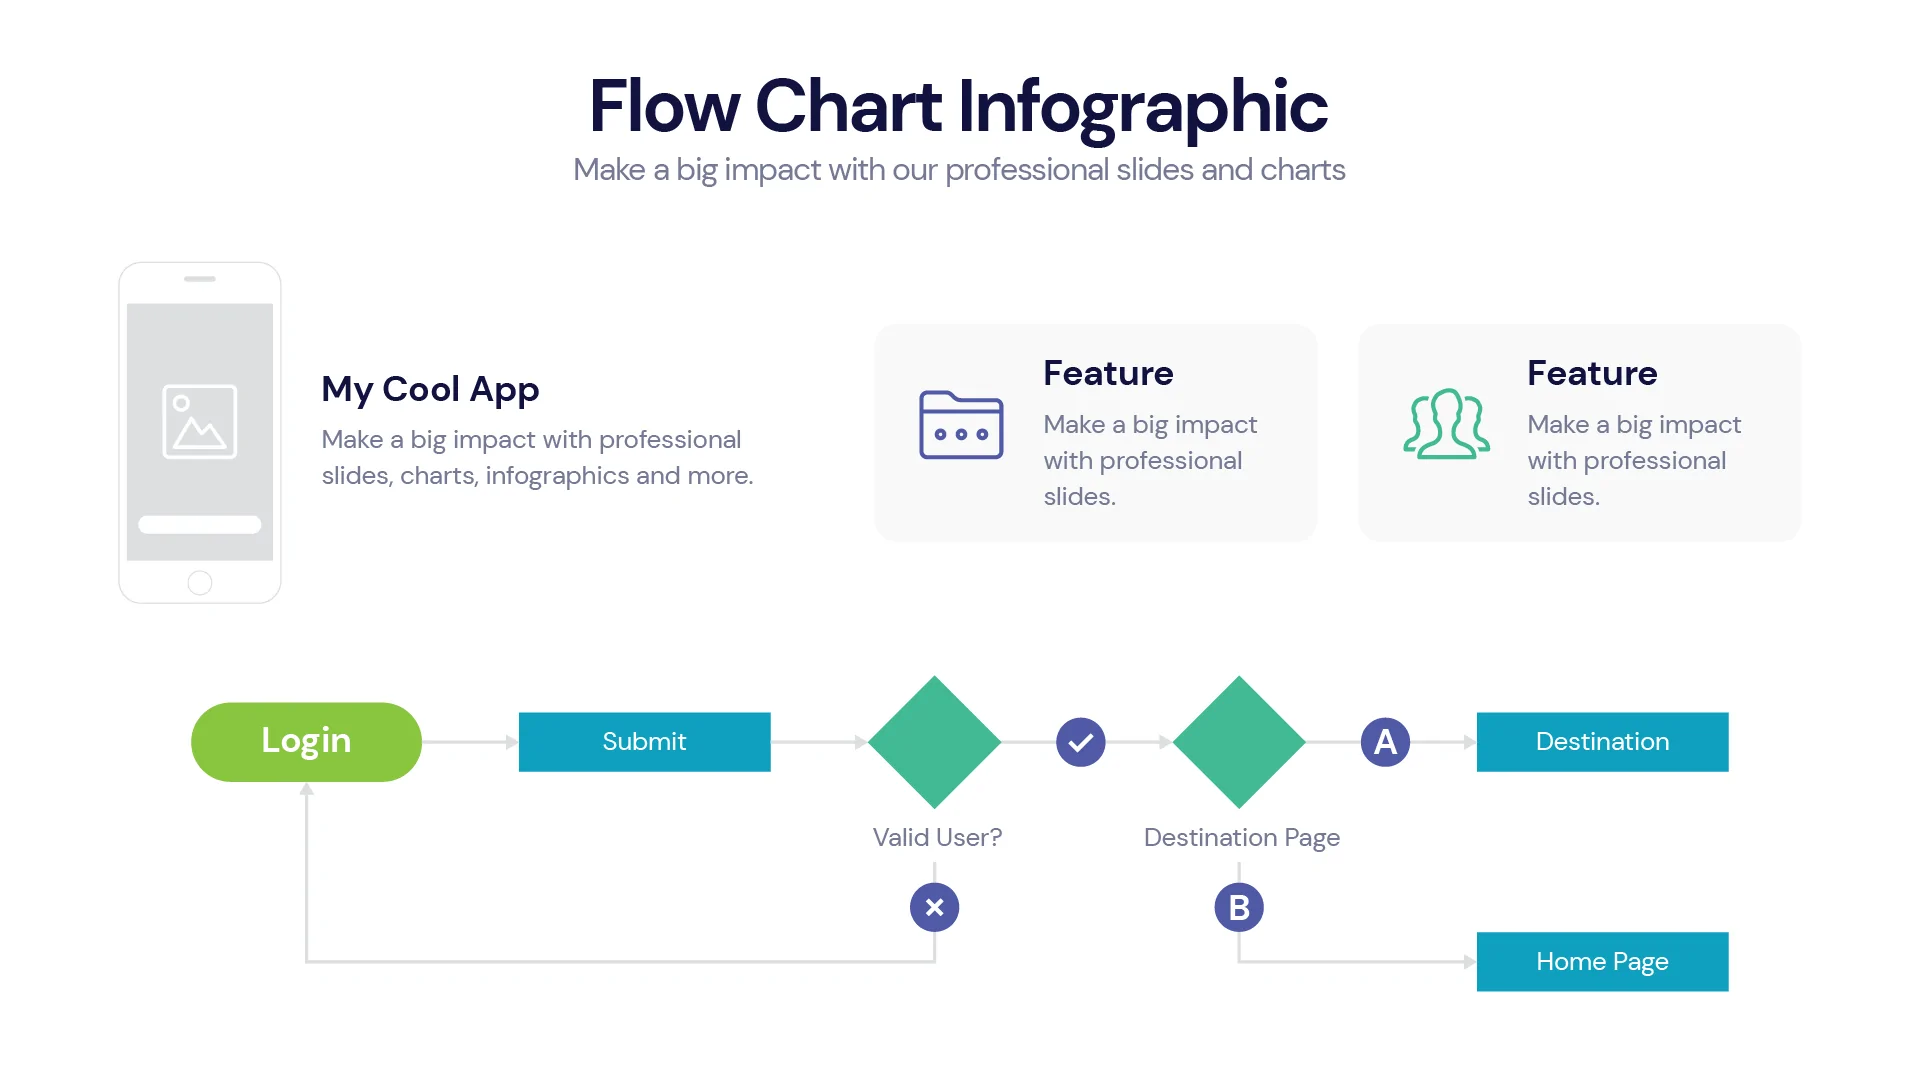 Flow Chart Infographic Templates PowerPoint slides